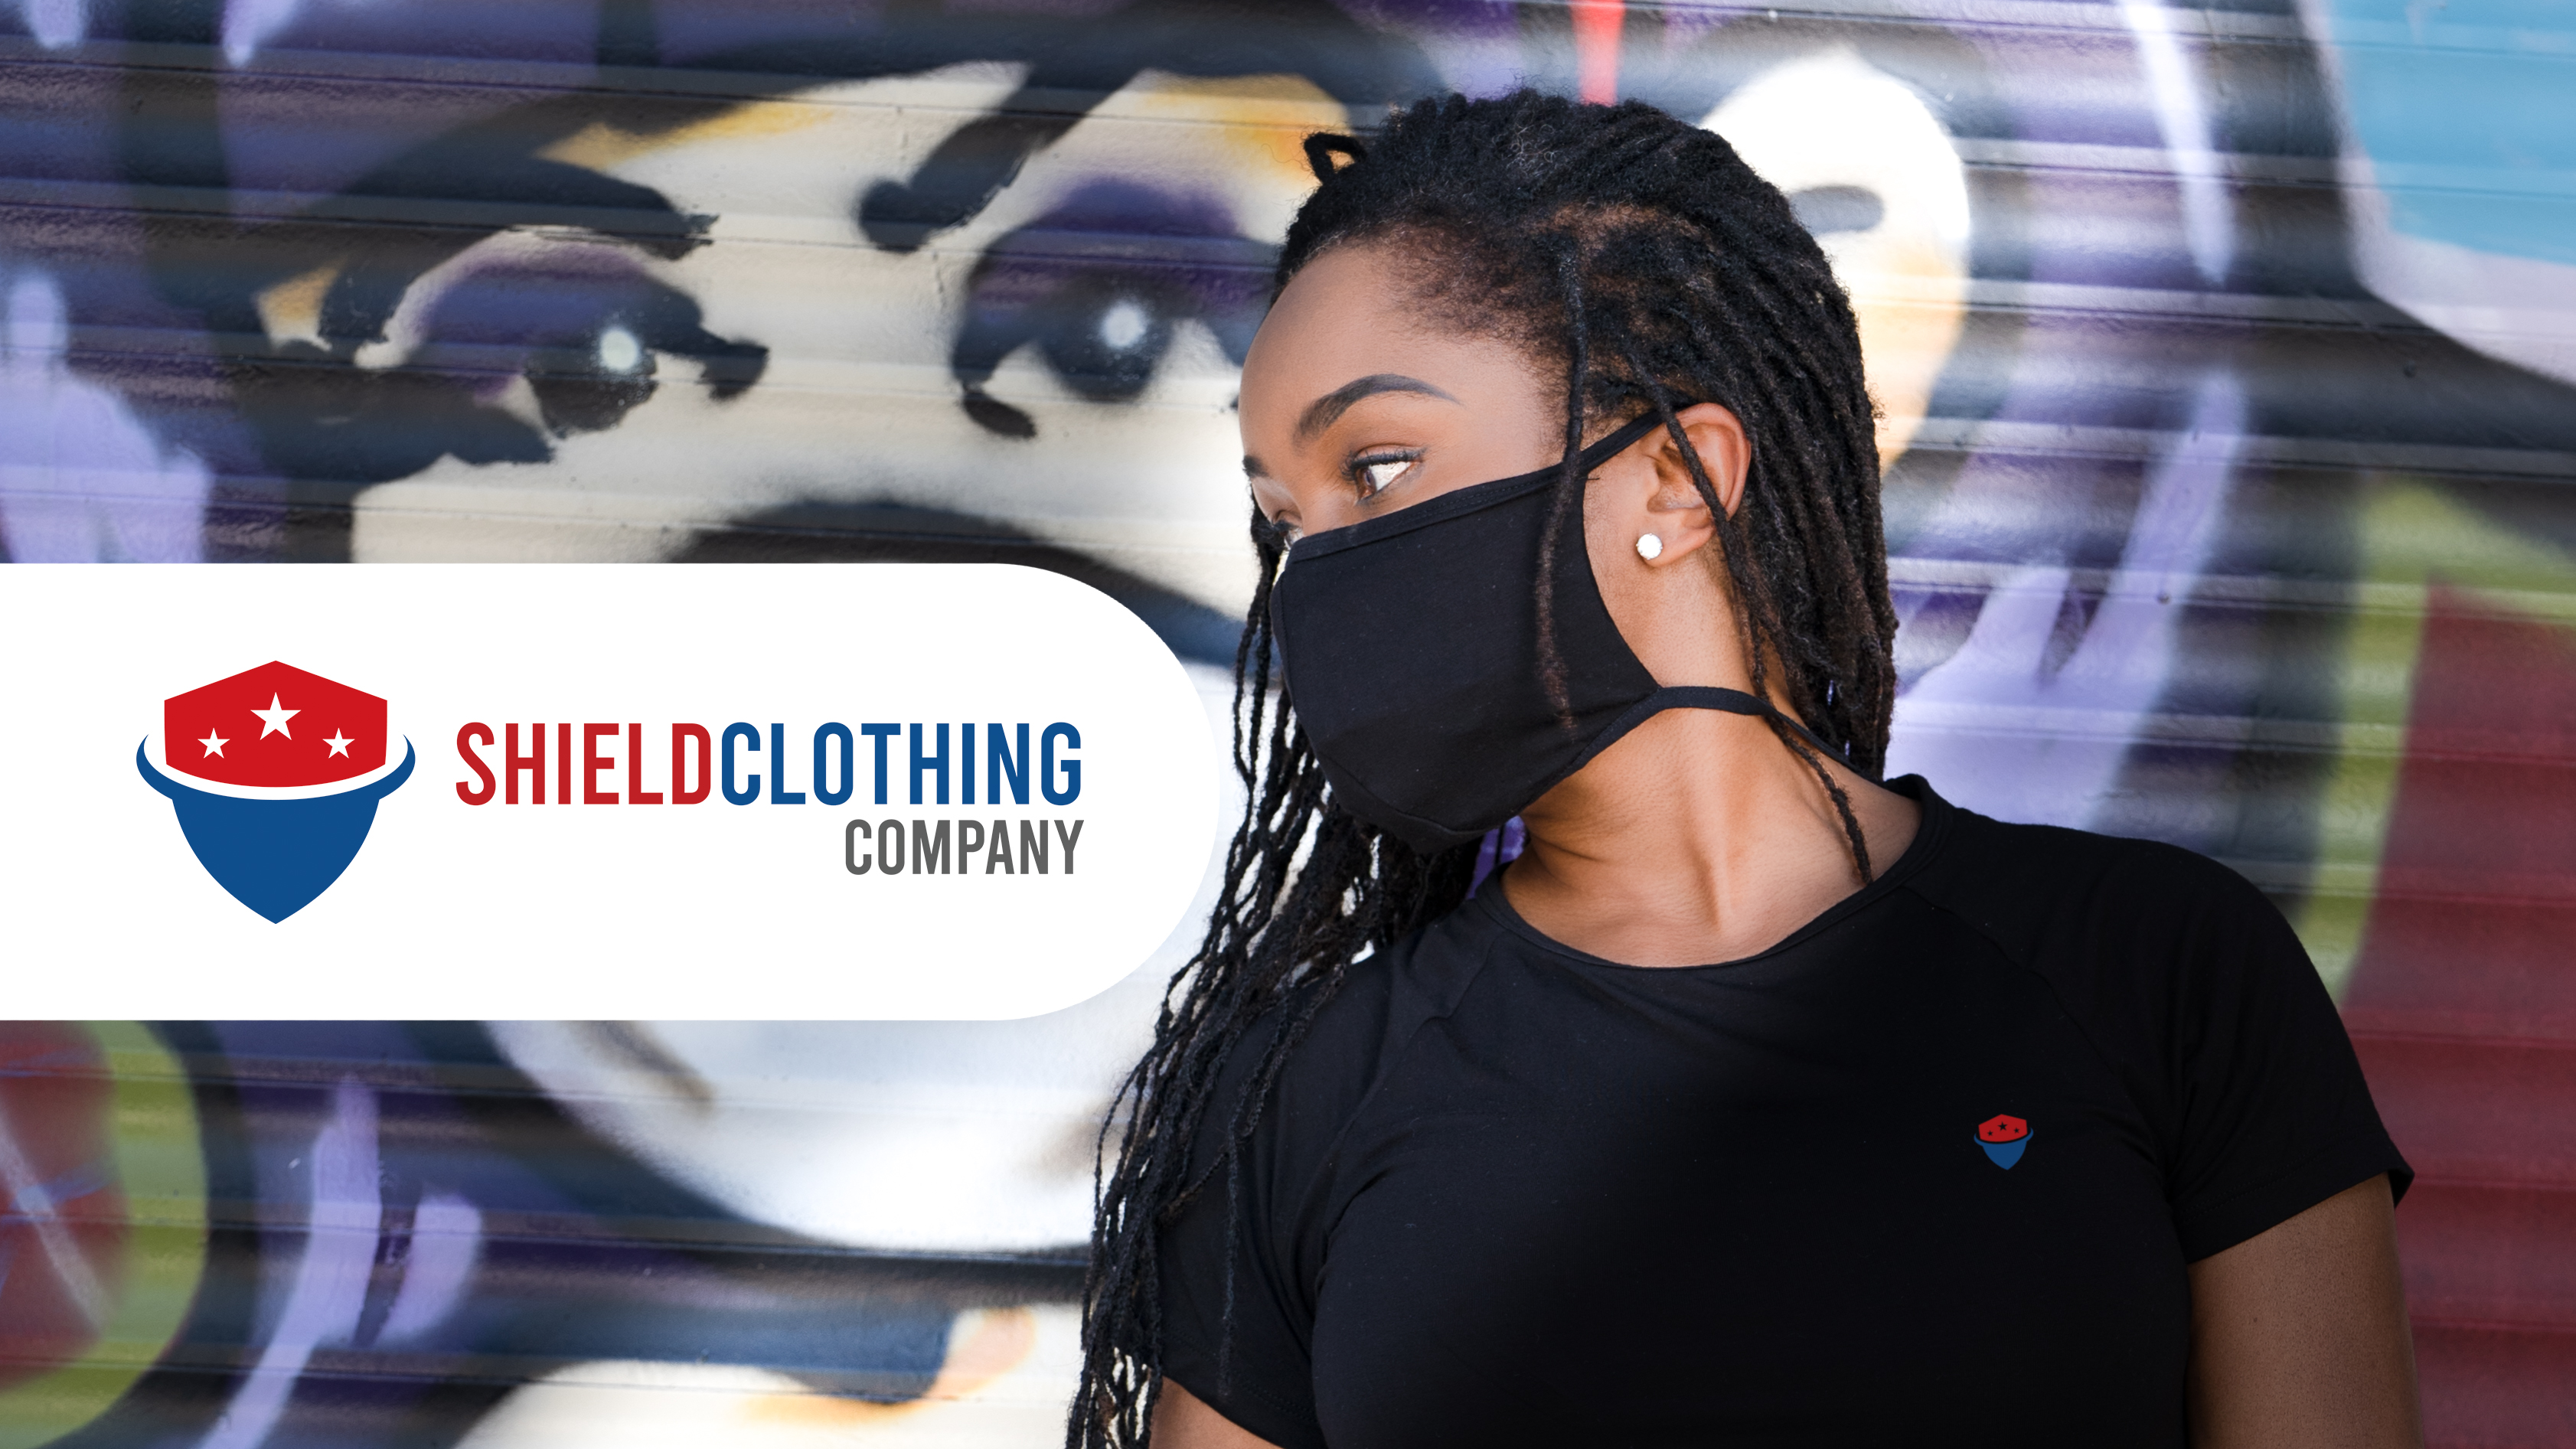 Shield Clothing Co Achieves Their $10,000 Kickstarter Goal in Less Than 48 Hours